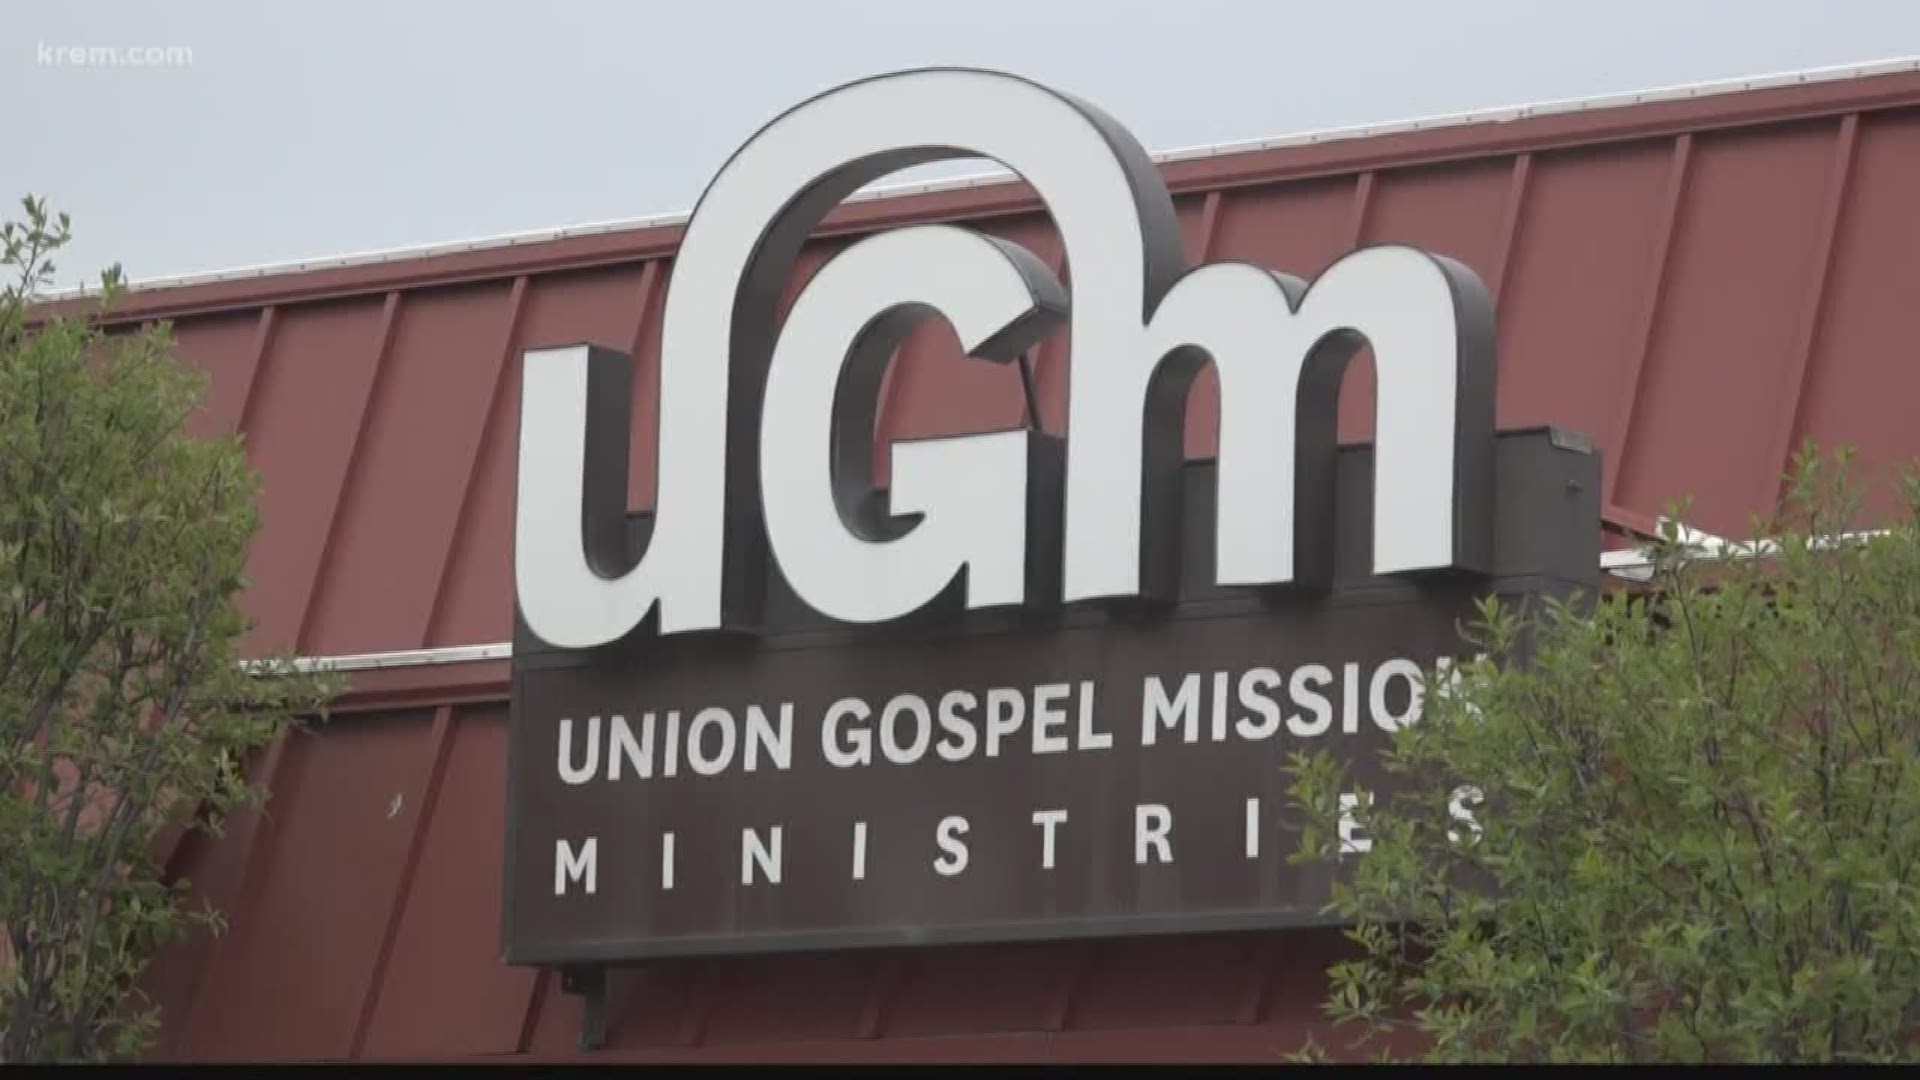 The deal has been criticized by activists because of UGM's discriminatory hiring practices but is being tabled because of fairness concerns.